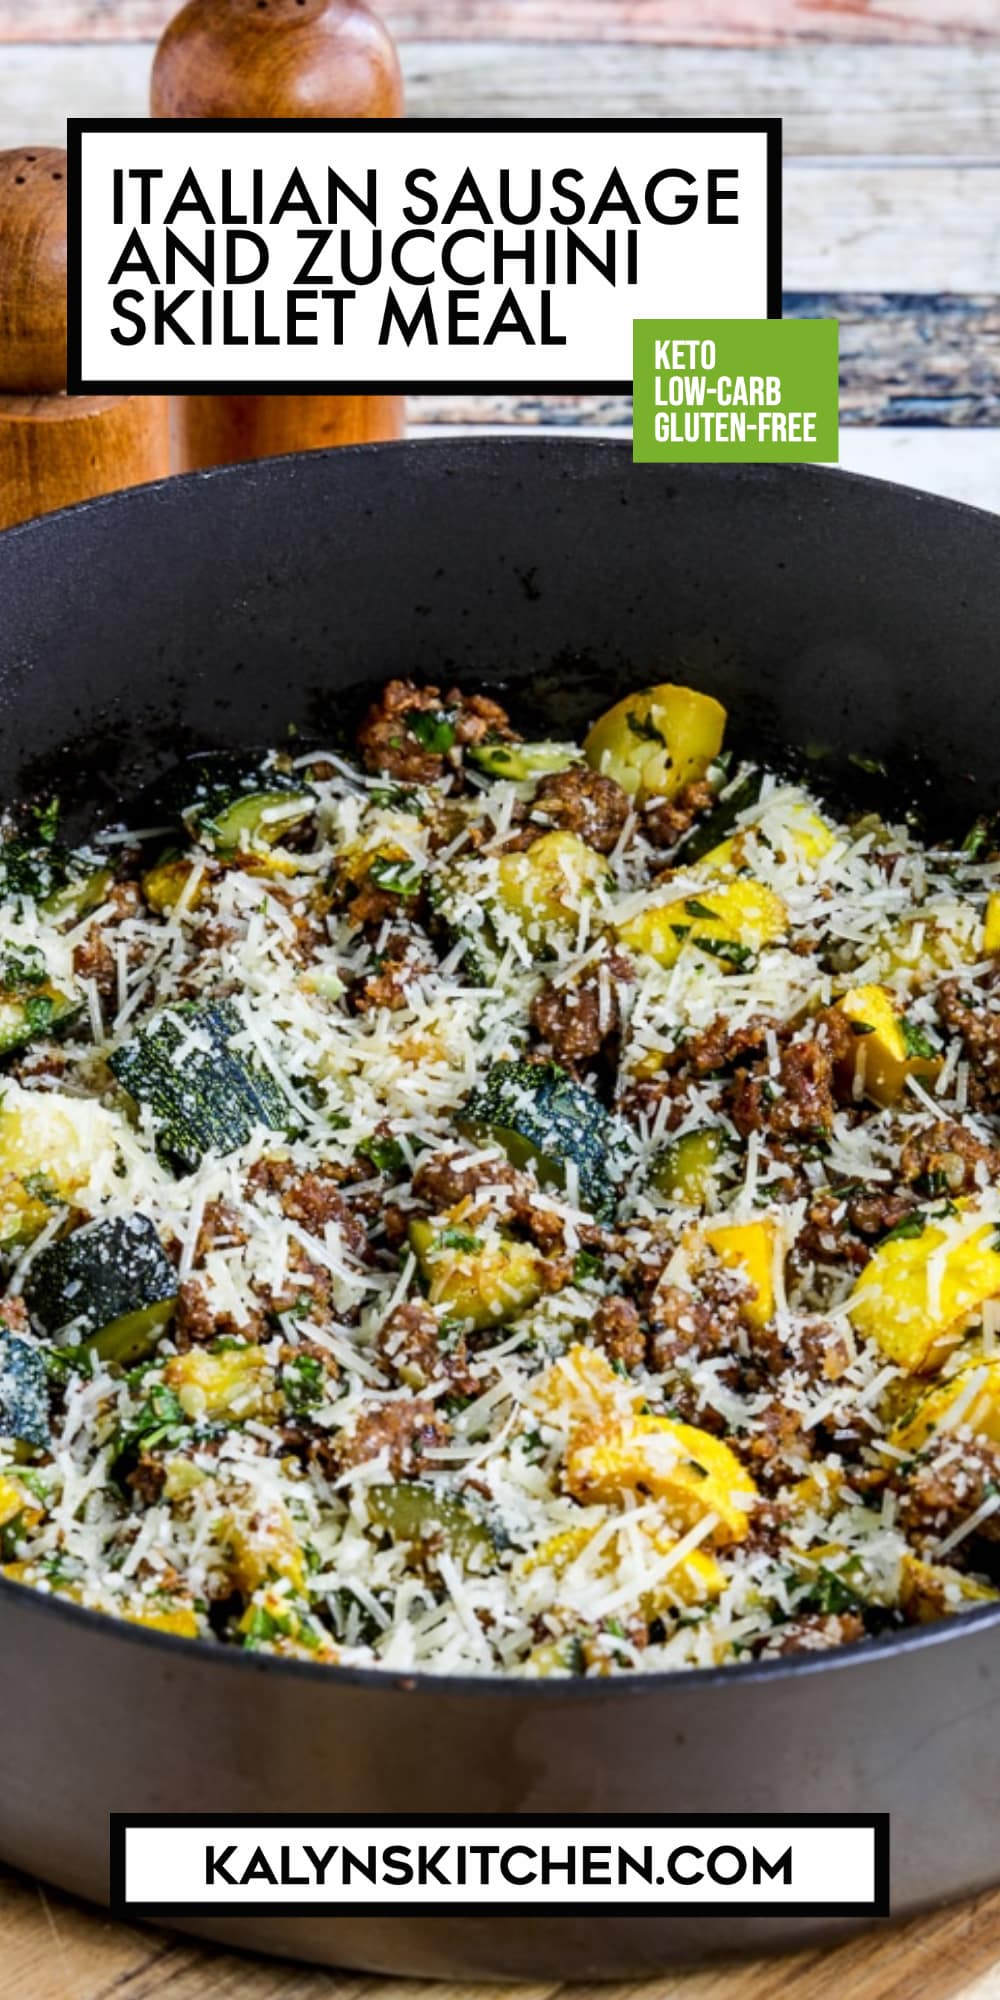 Pinterest image of Italian Sausage and Zucchini Skillet Meal